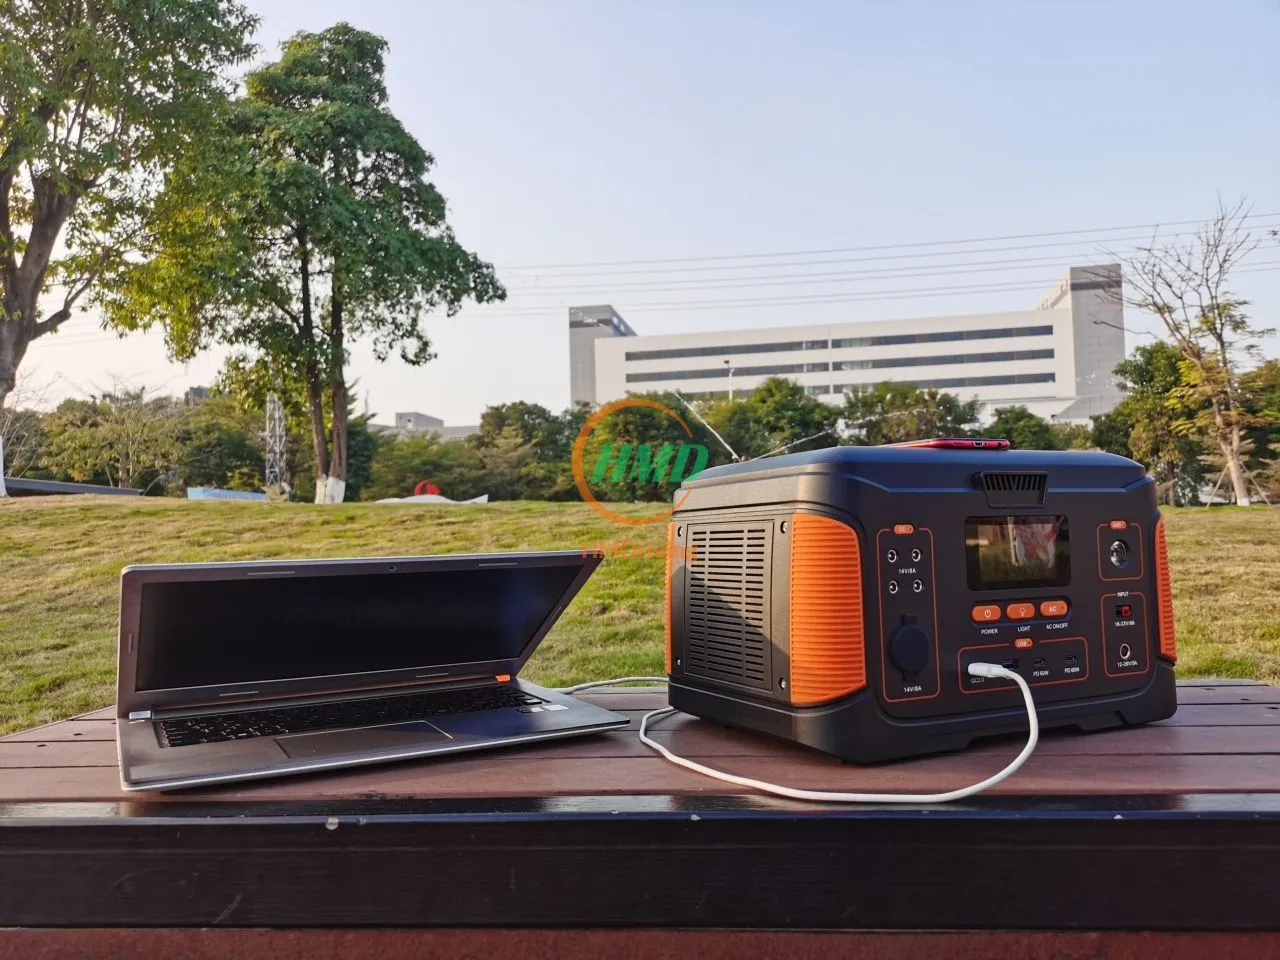 500W&520Wh Plus Multi-function Portable Power Station